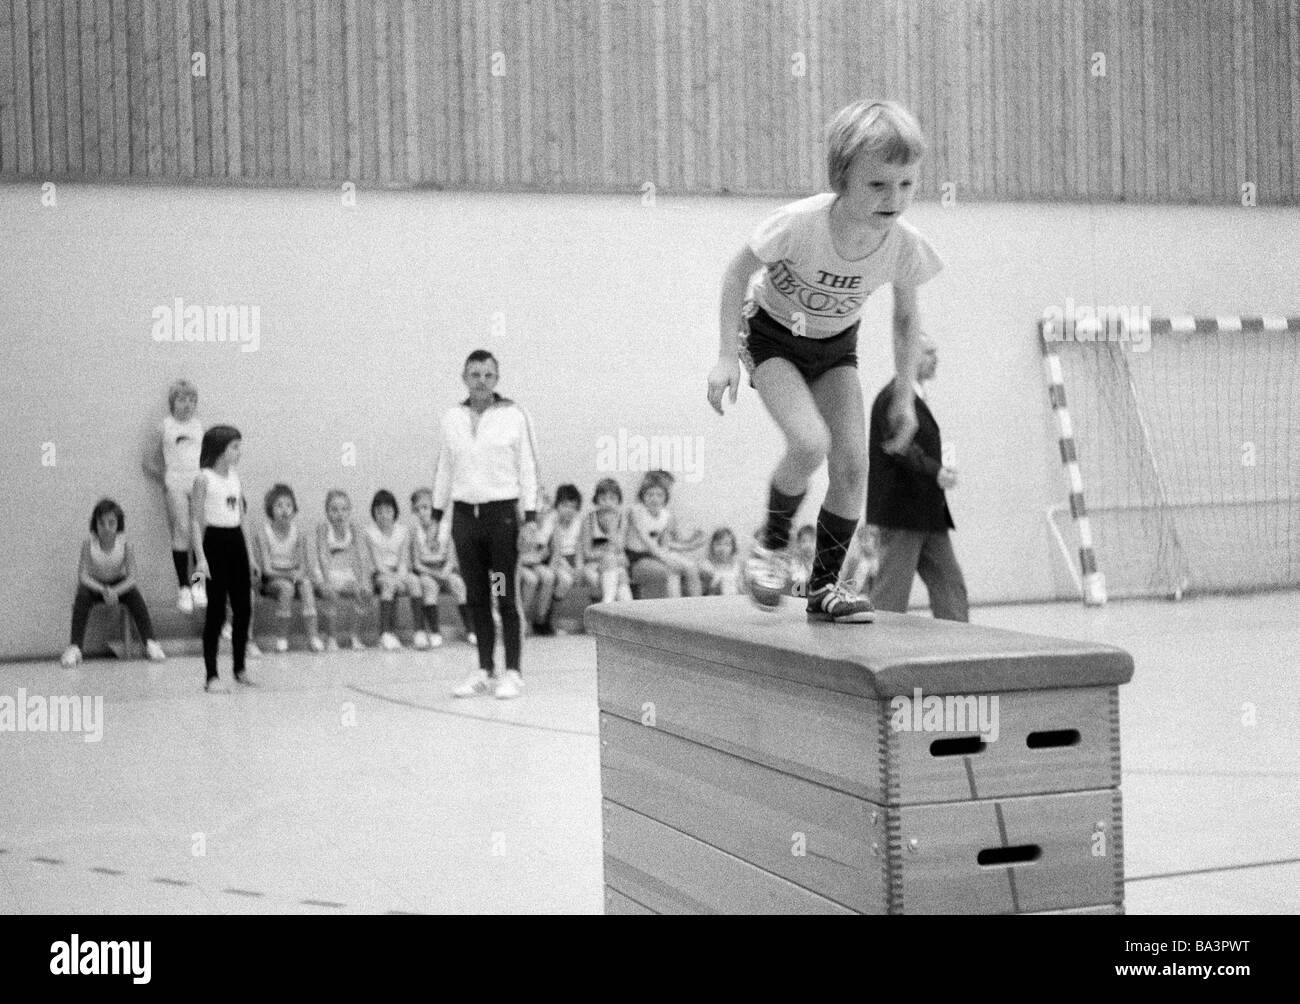 Seventies Black And White Photo Edification School Sports Physical